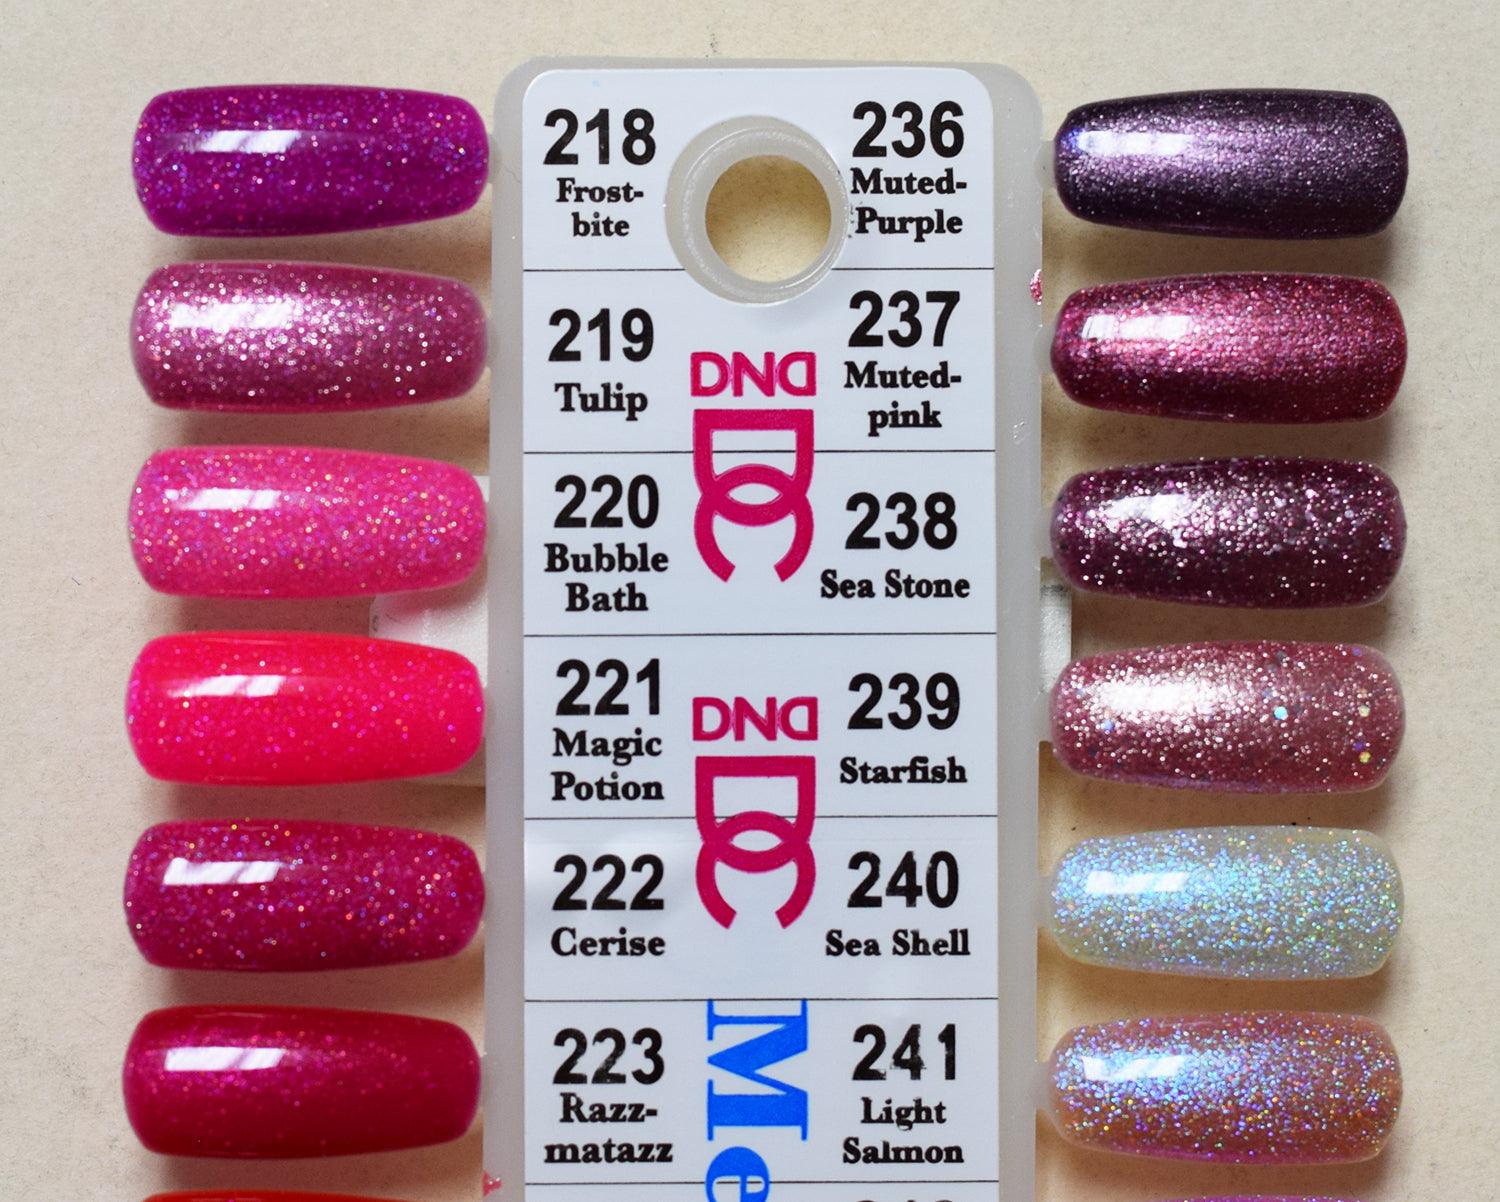 DND DC MERMAID Collection #236 Muted Purple